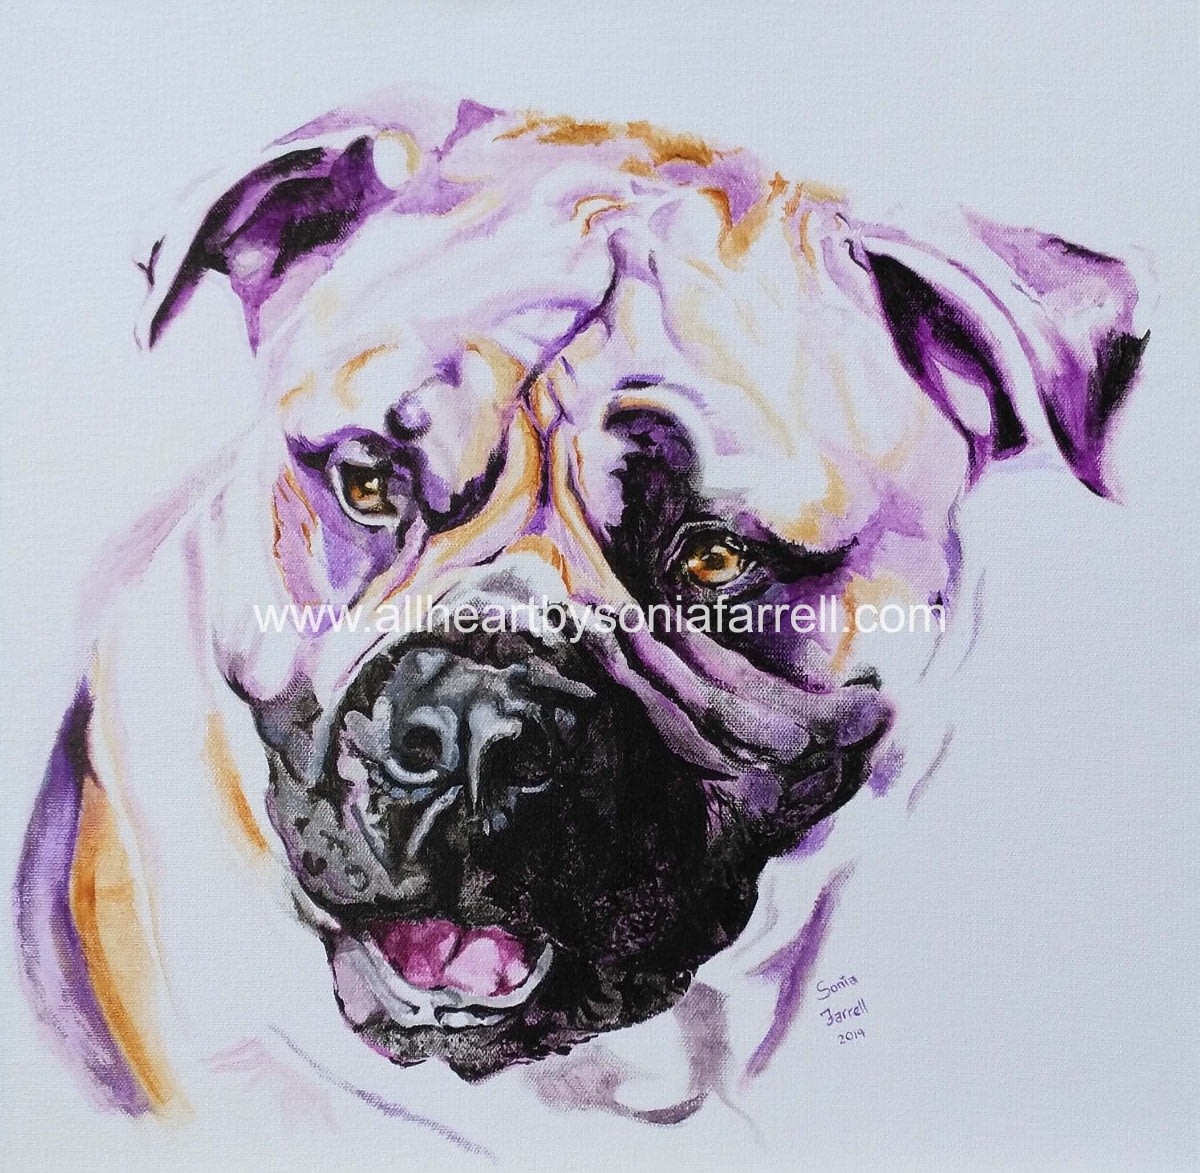 Find out how to order your own custom pet portrait painting